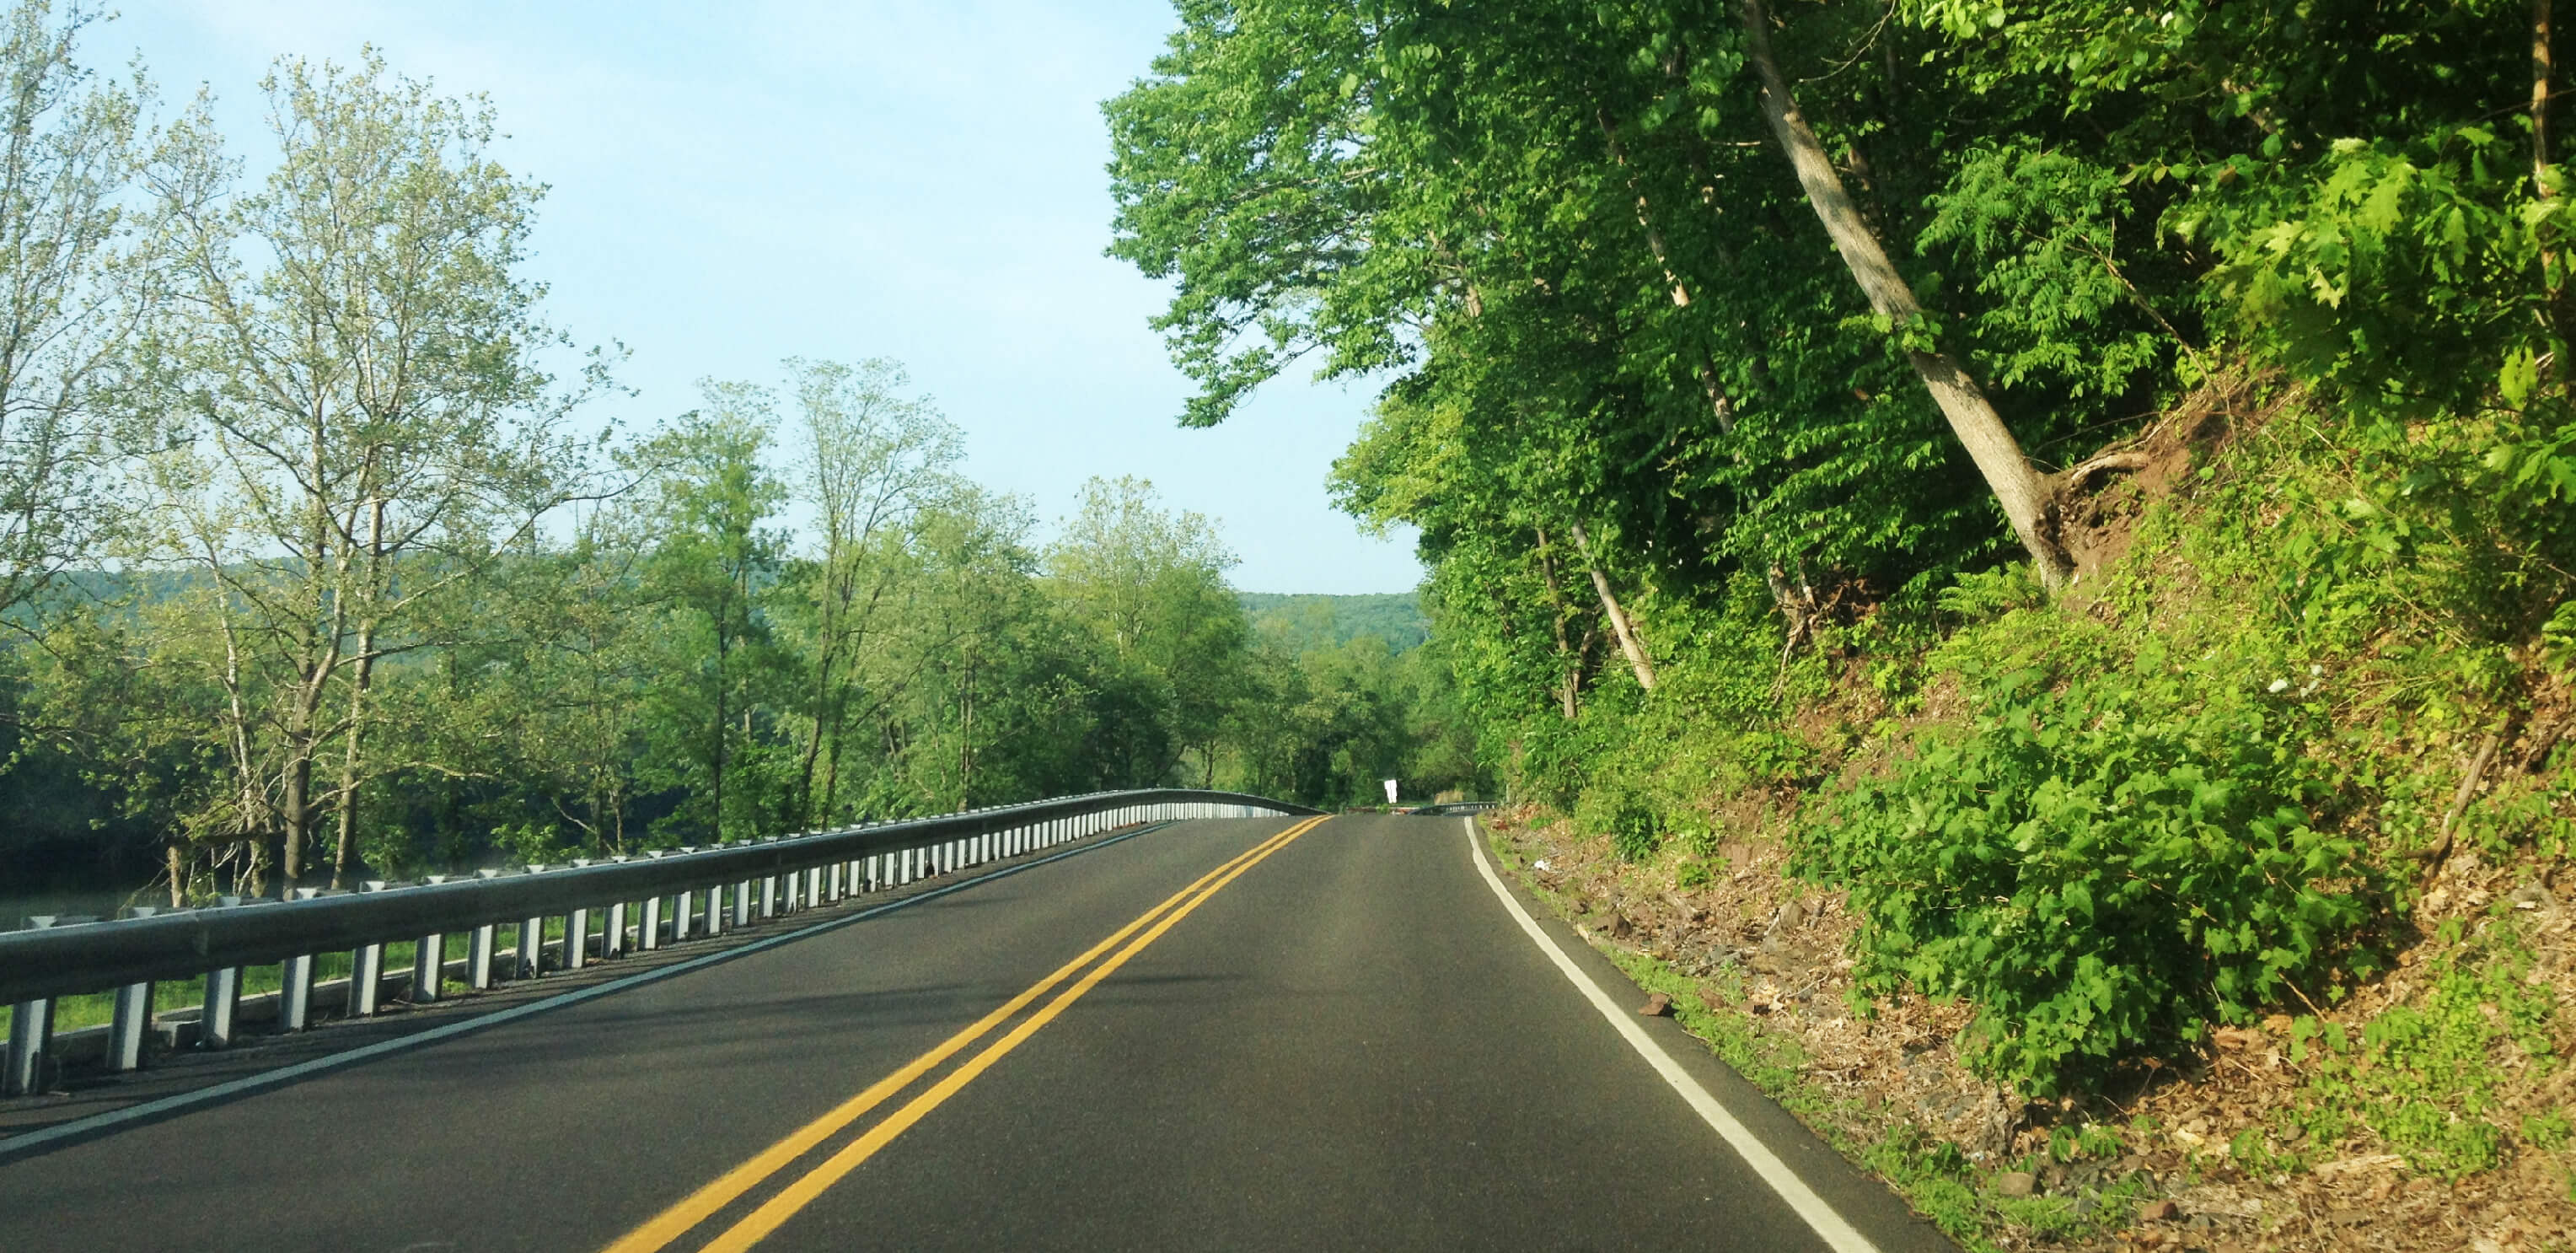 Photograph of State Route 32 in Pennsylvania